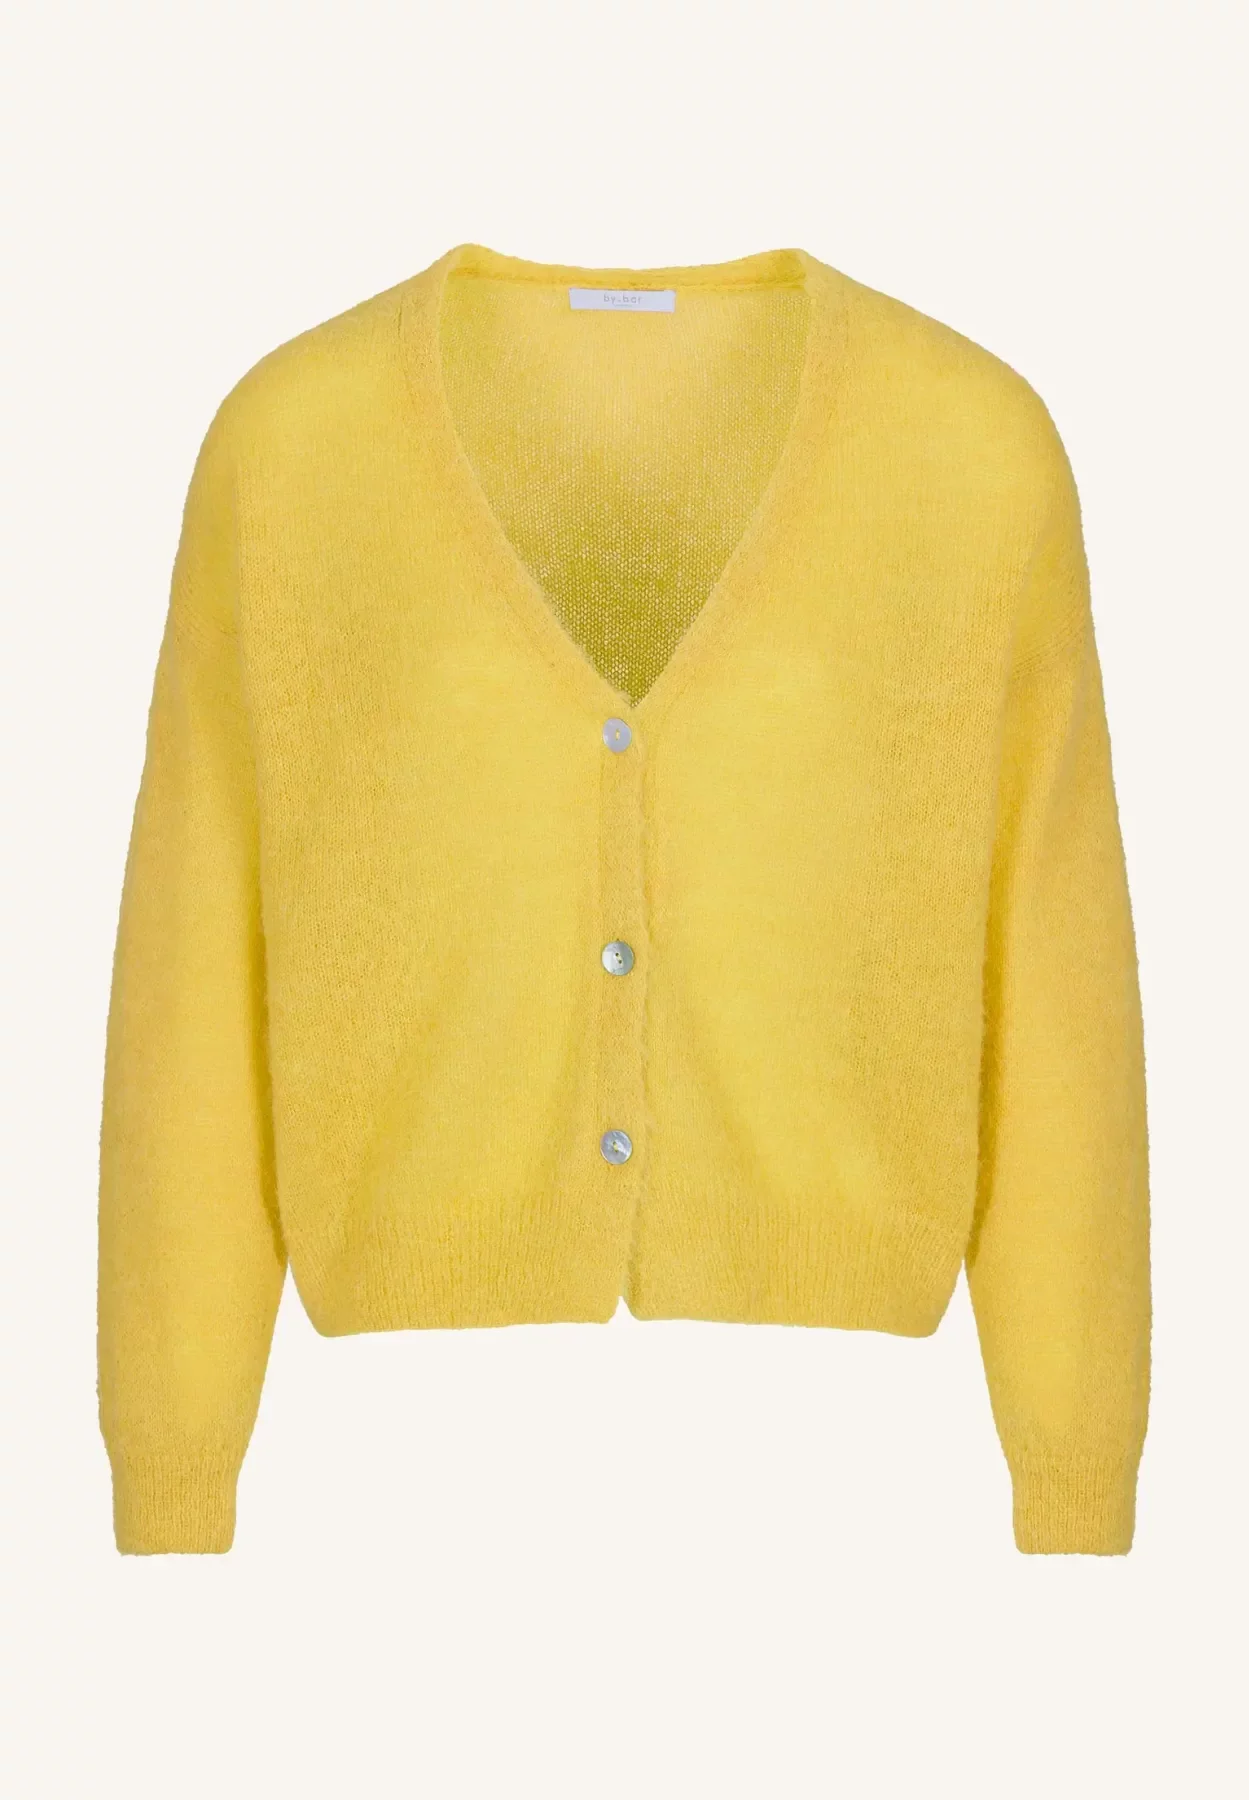 by-bar amsterdam - liv cardigan - misted yellow 5